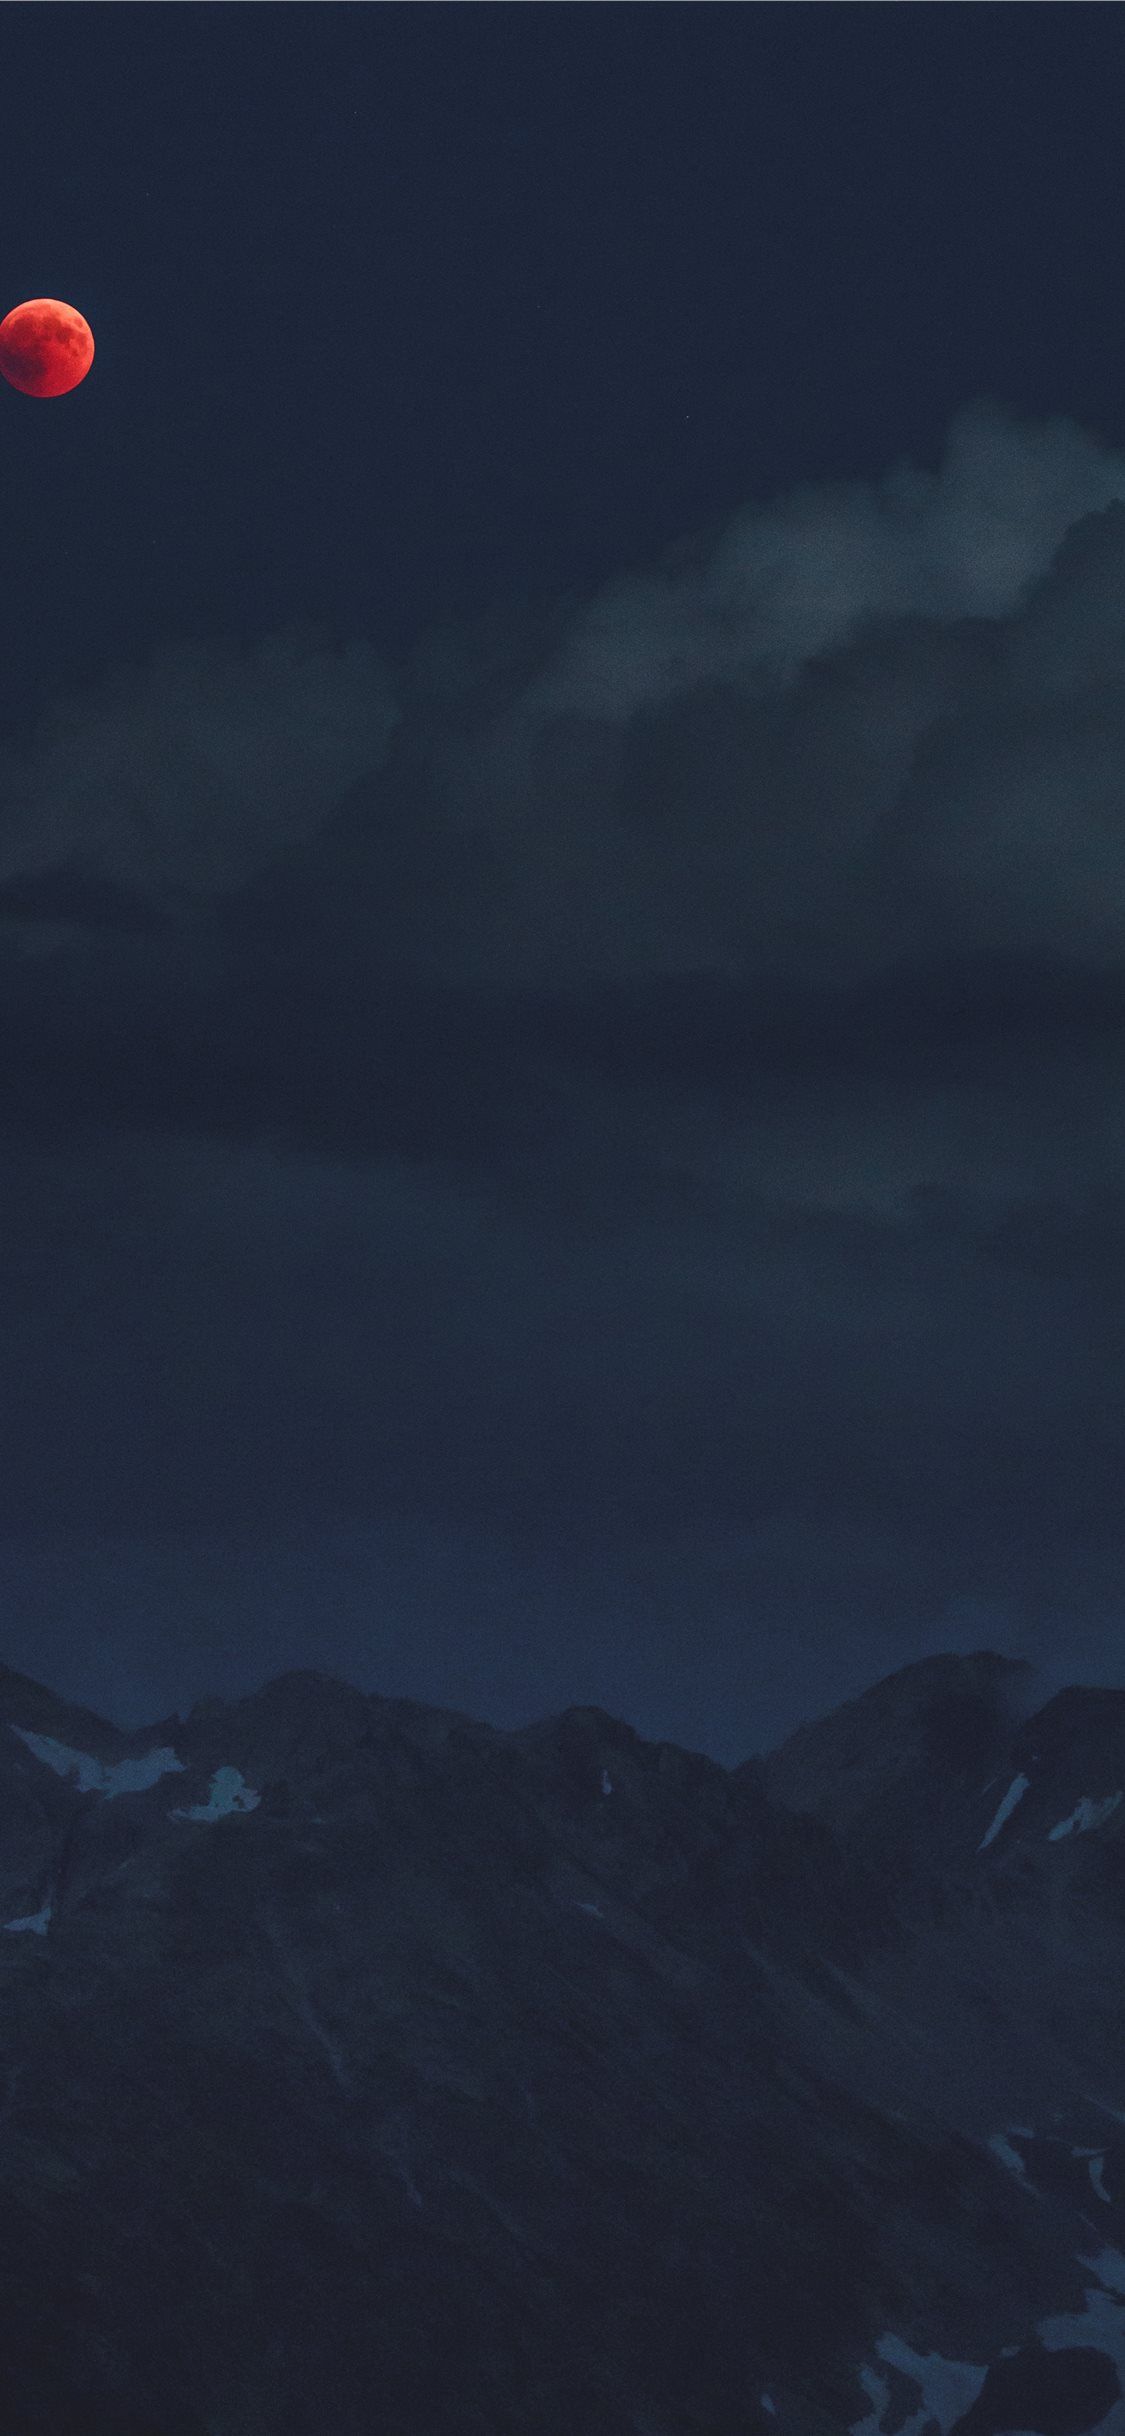 Blood Moon over a Dark Mountain iPhone X Wallpaper Free Download